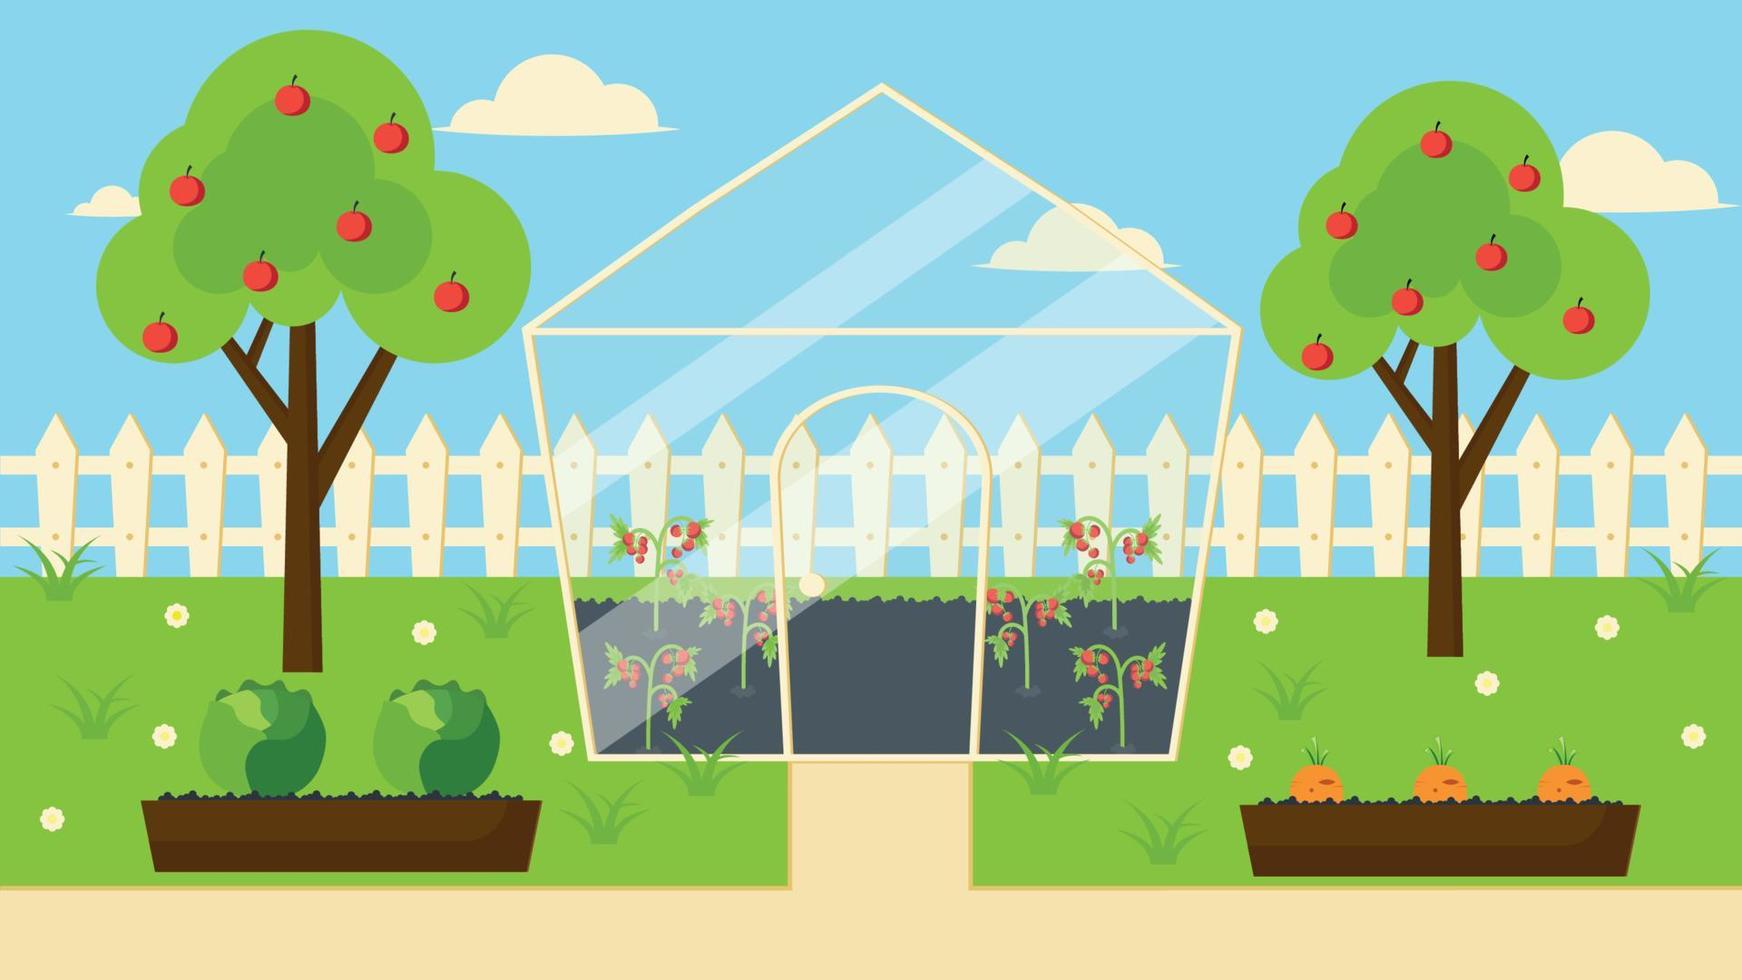 Garden Plot With Greenhouse and High Bbeds Organic Farming vector